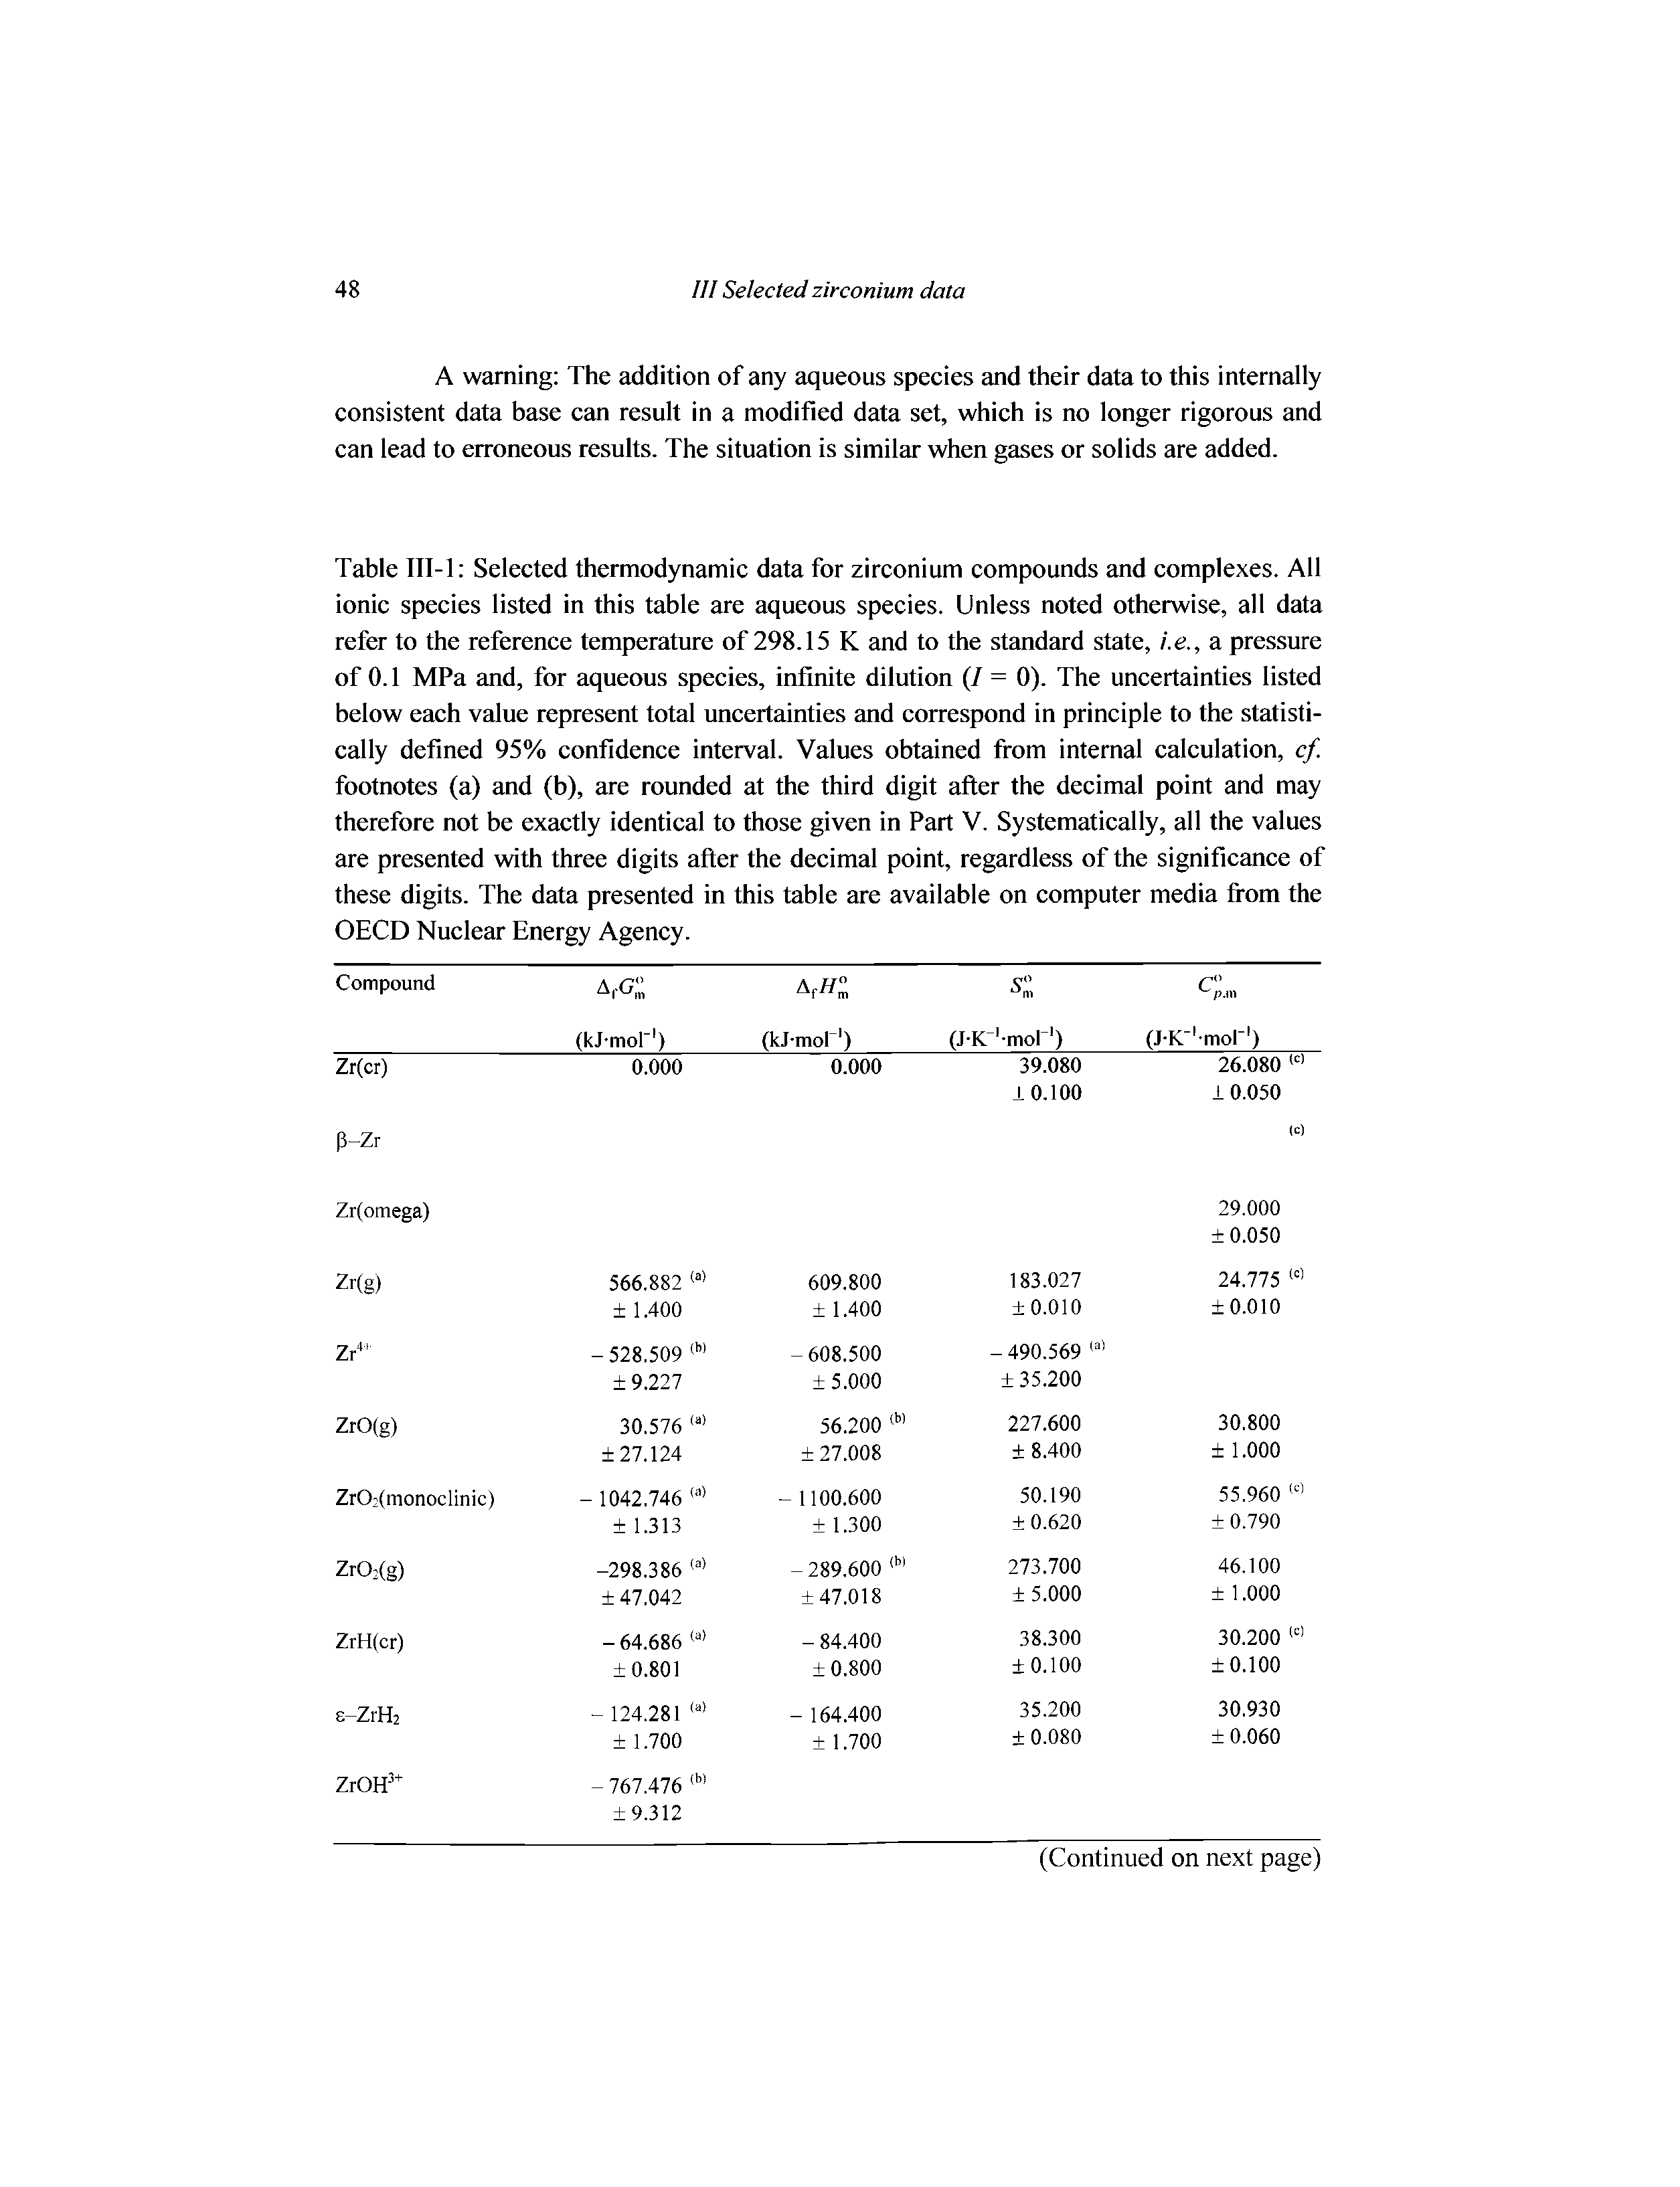 Table III-l Seleeted thermodynamic data for zirconium compounds and complexes. All ionic species listed in this table are aqueous species. Unless noted otherwise, all data refer to the reference temperature of 298.15 K and to the standard state, i.e., a pressure of 0.1 MPa and, for aqueous species, infinite dilution (/ = 0). The uncertainties listed below each value represent total uncertainties and correspond in principle to the statistically defined 95% confidence interval. Values obtained from internal calculation, cf. footnotes (a) and (b), are rounded at the third digit after the decimal point and may therefore not be exactly Identical to those given in Part V. Systematically, all the values are presented with three digits after the decimal point, regardless of the significance of these digits. The data presented in this table are available on computer media from the OECD Nuclear Energy Agency.